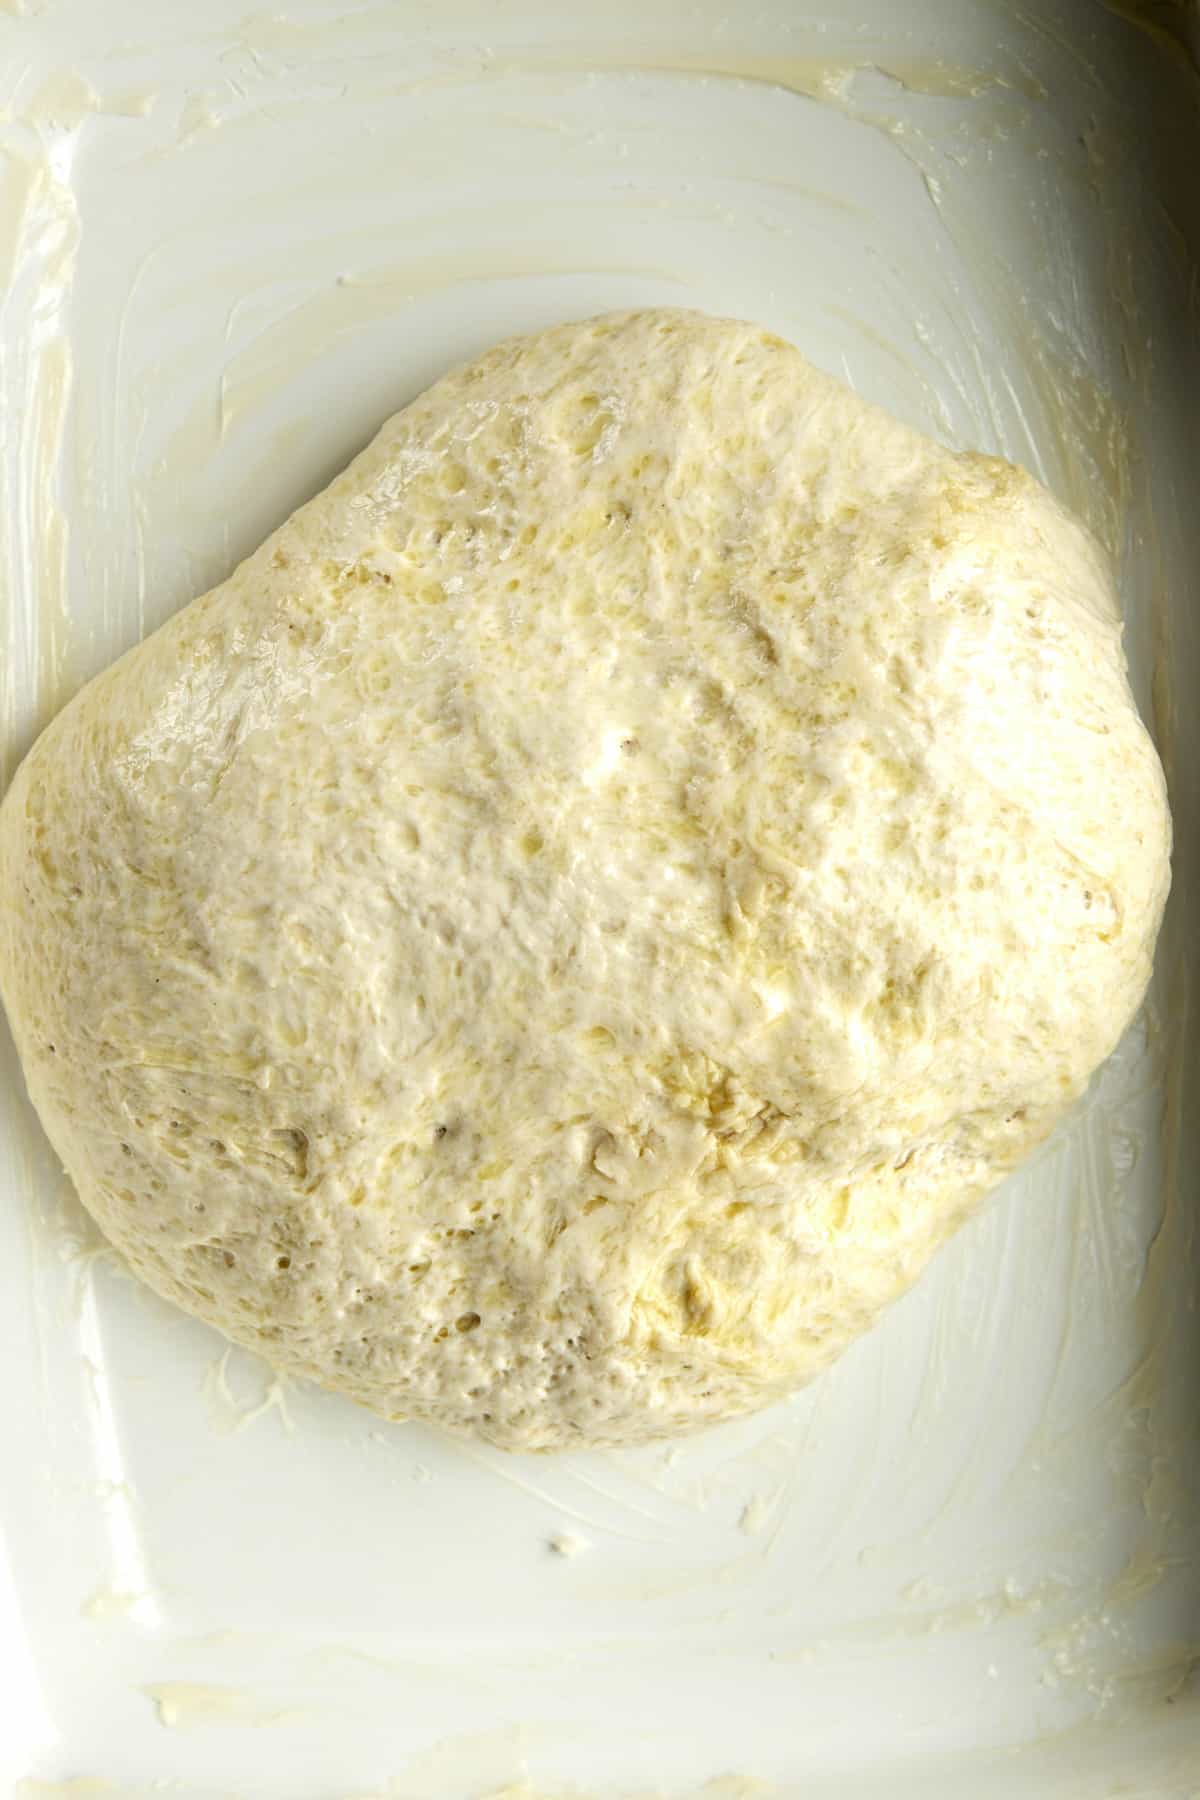 Overhead image of a ball of dough in a baking dish.